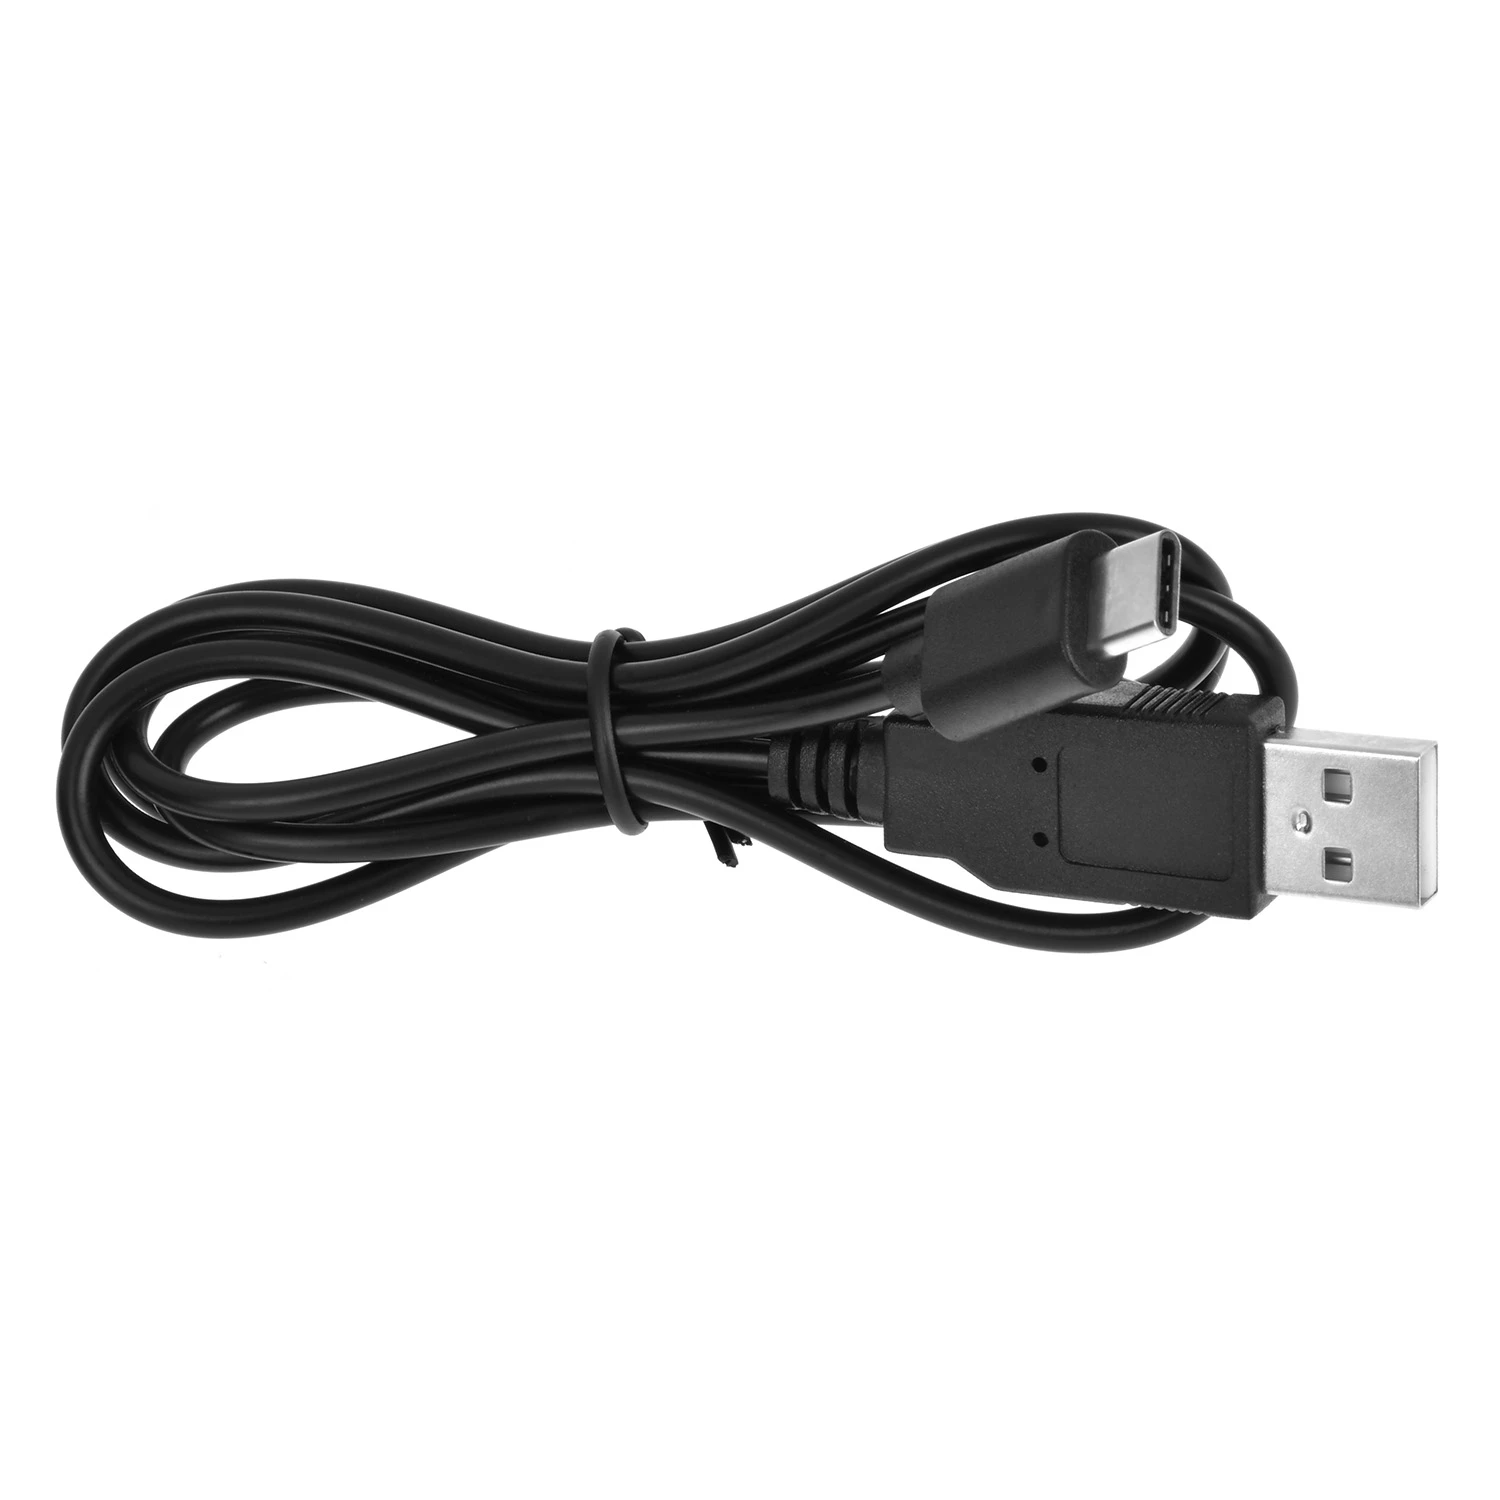 USB Power Charger Cable Cord Lead For Sena SMH10R Bluetooth Headset Intercom Lysee Data Cables 